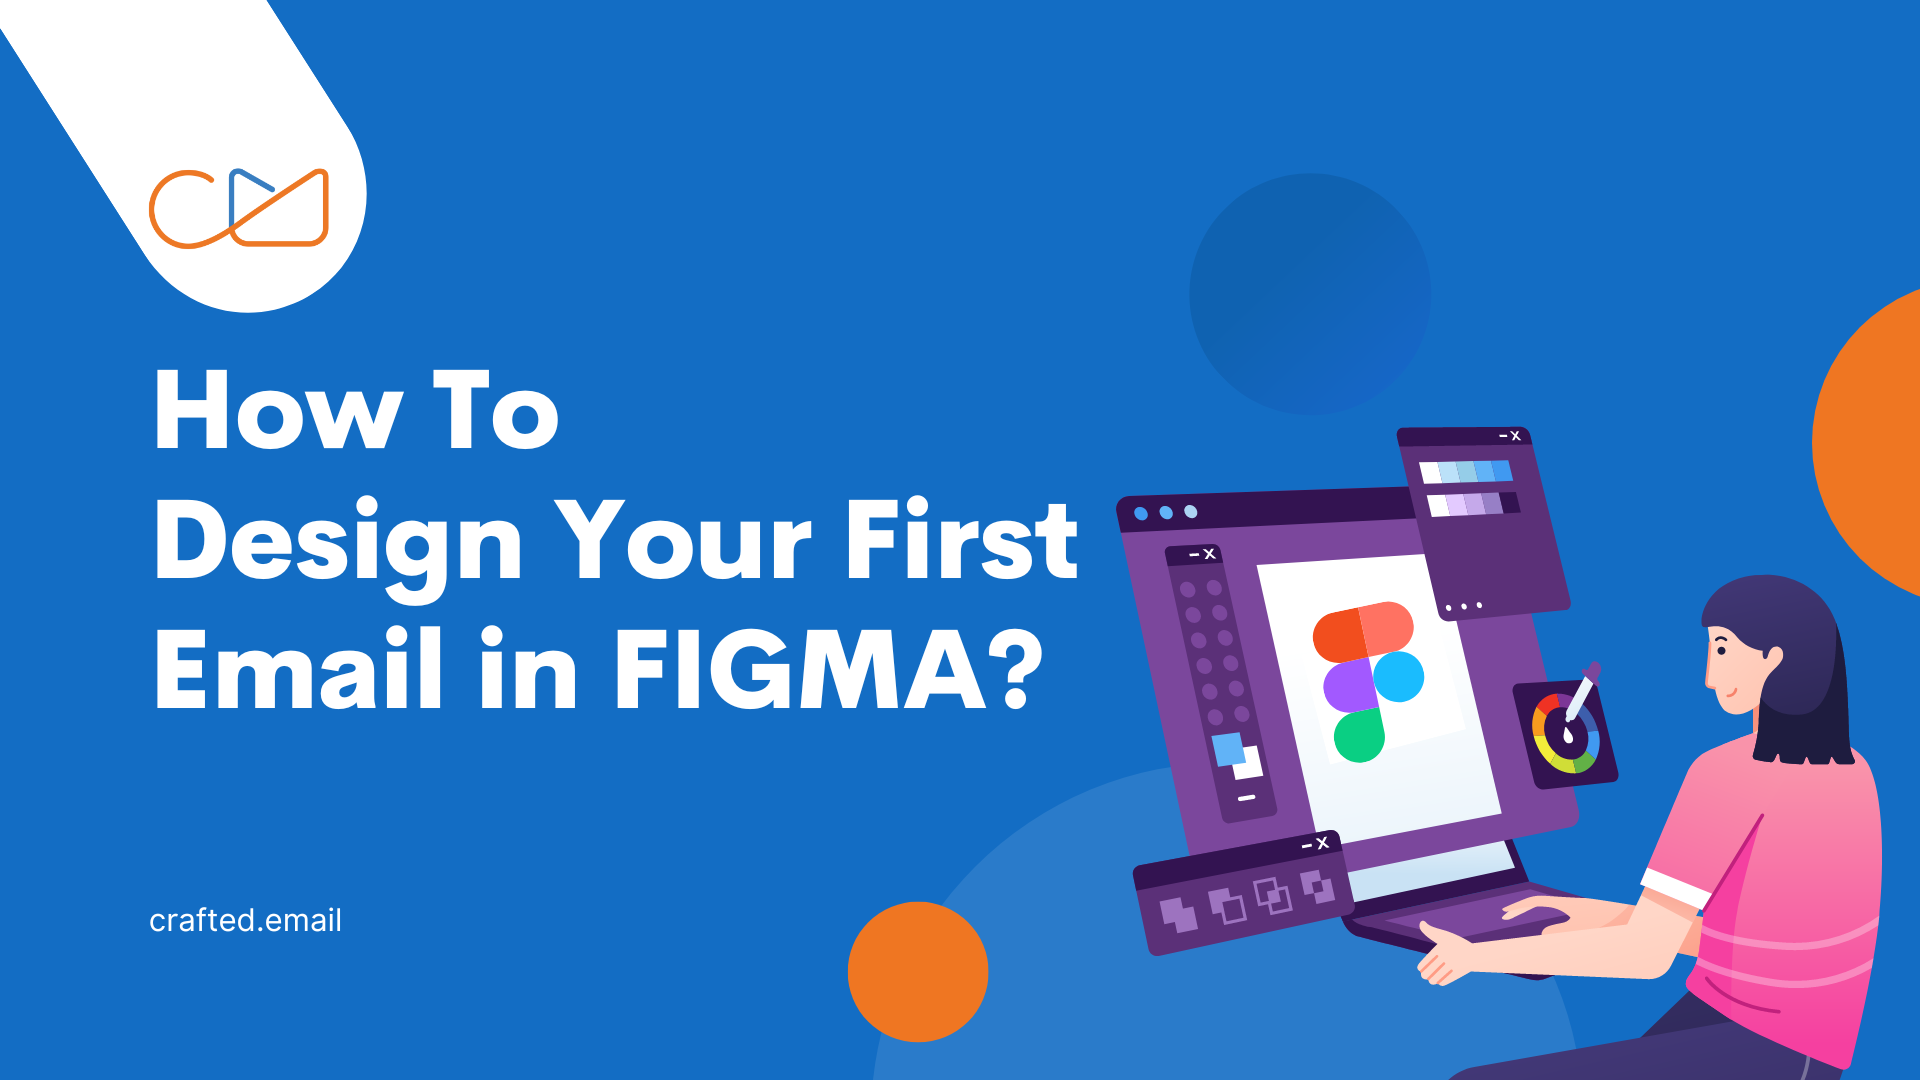 FIGMA HTML email template-Read on to know how to design your first email in FIGMA for beginners and the elements that make your email design a success so readers sit up and take notice